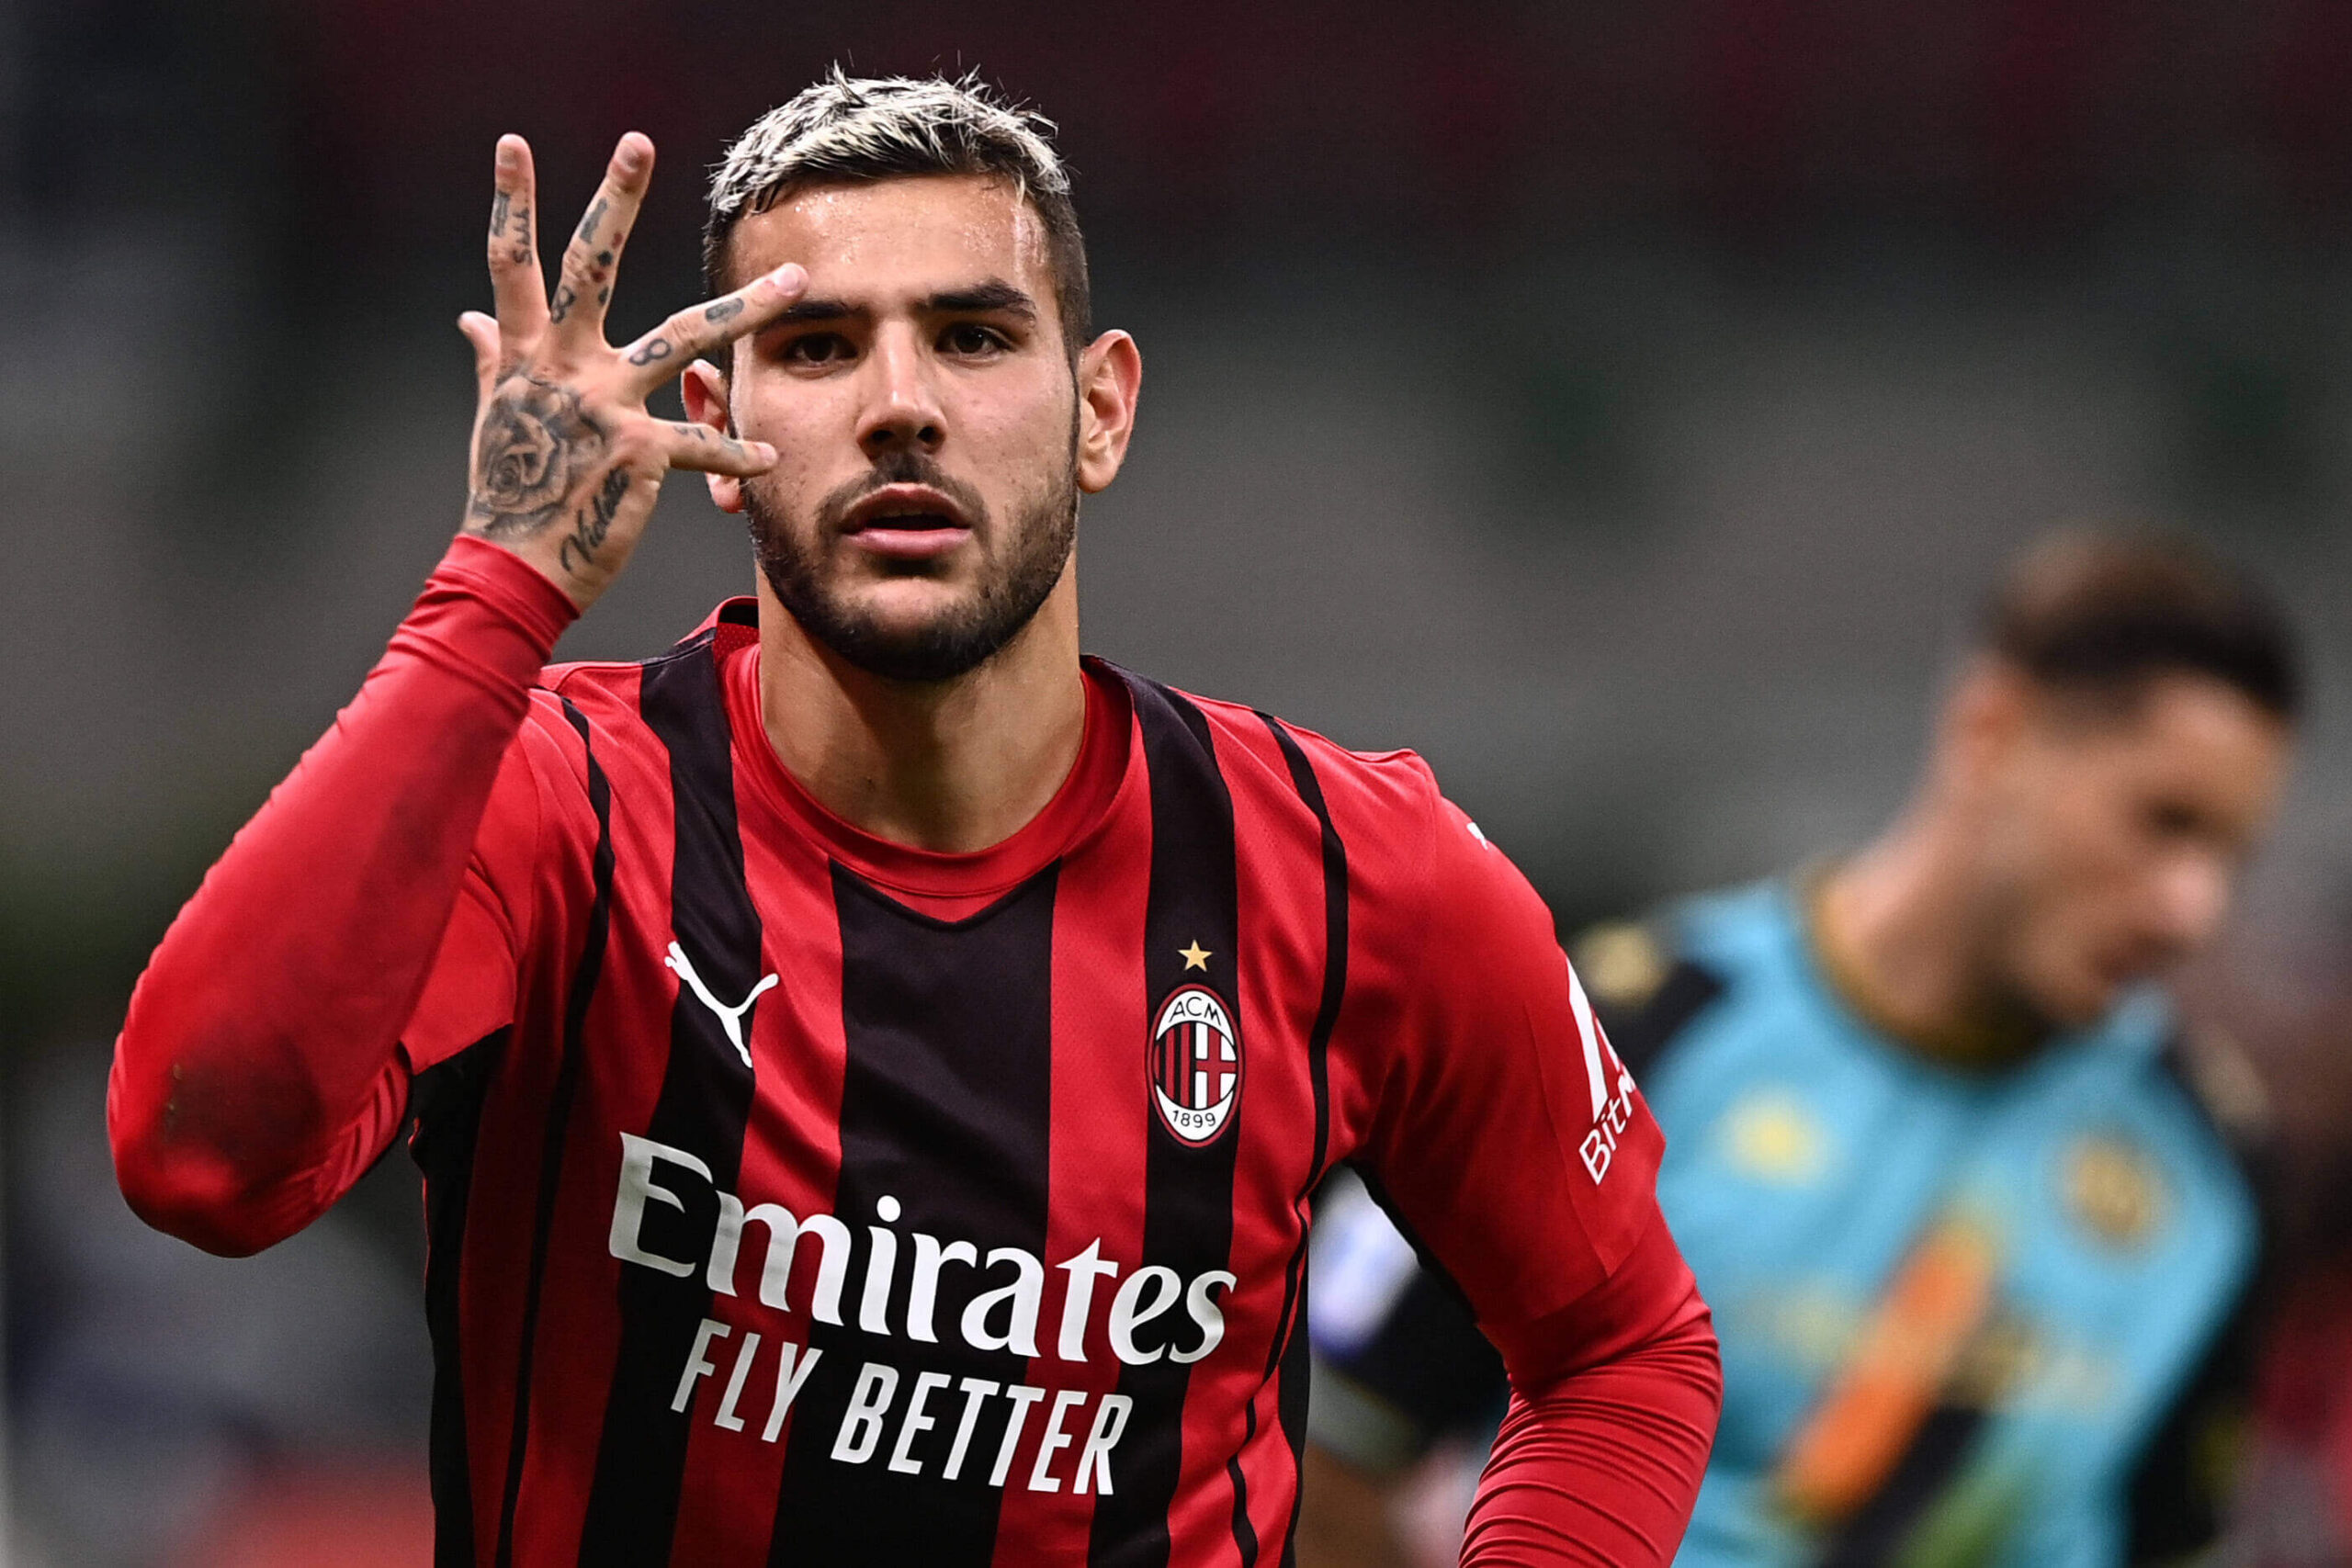 Theo Hernandez rejects Chelsea and Manchester City to stay at AC Milan